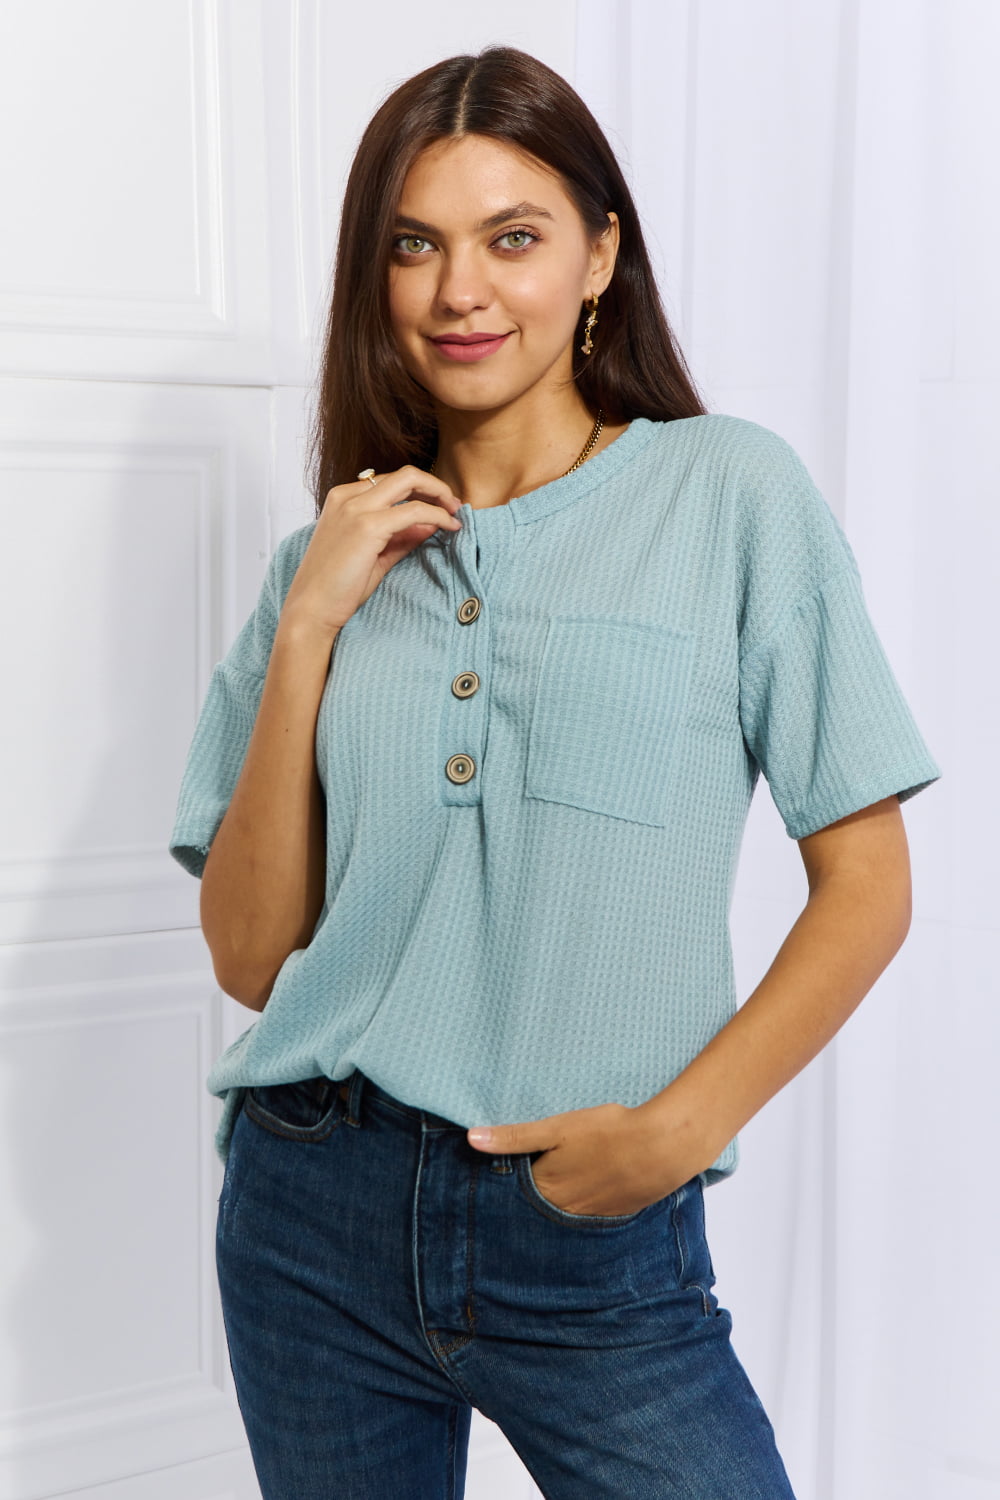 Heimish Made For You Full Size 1/4 Button Down Waffle Top in Blue  Krazy Heart Designs Boutique Pastel  Blue S 